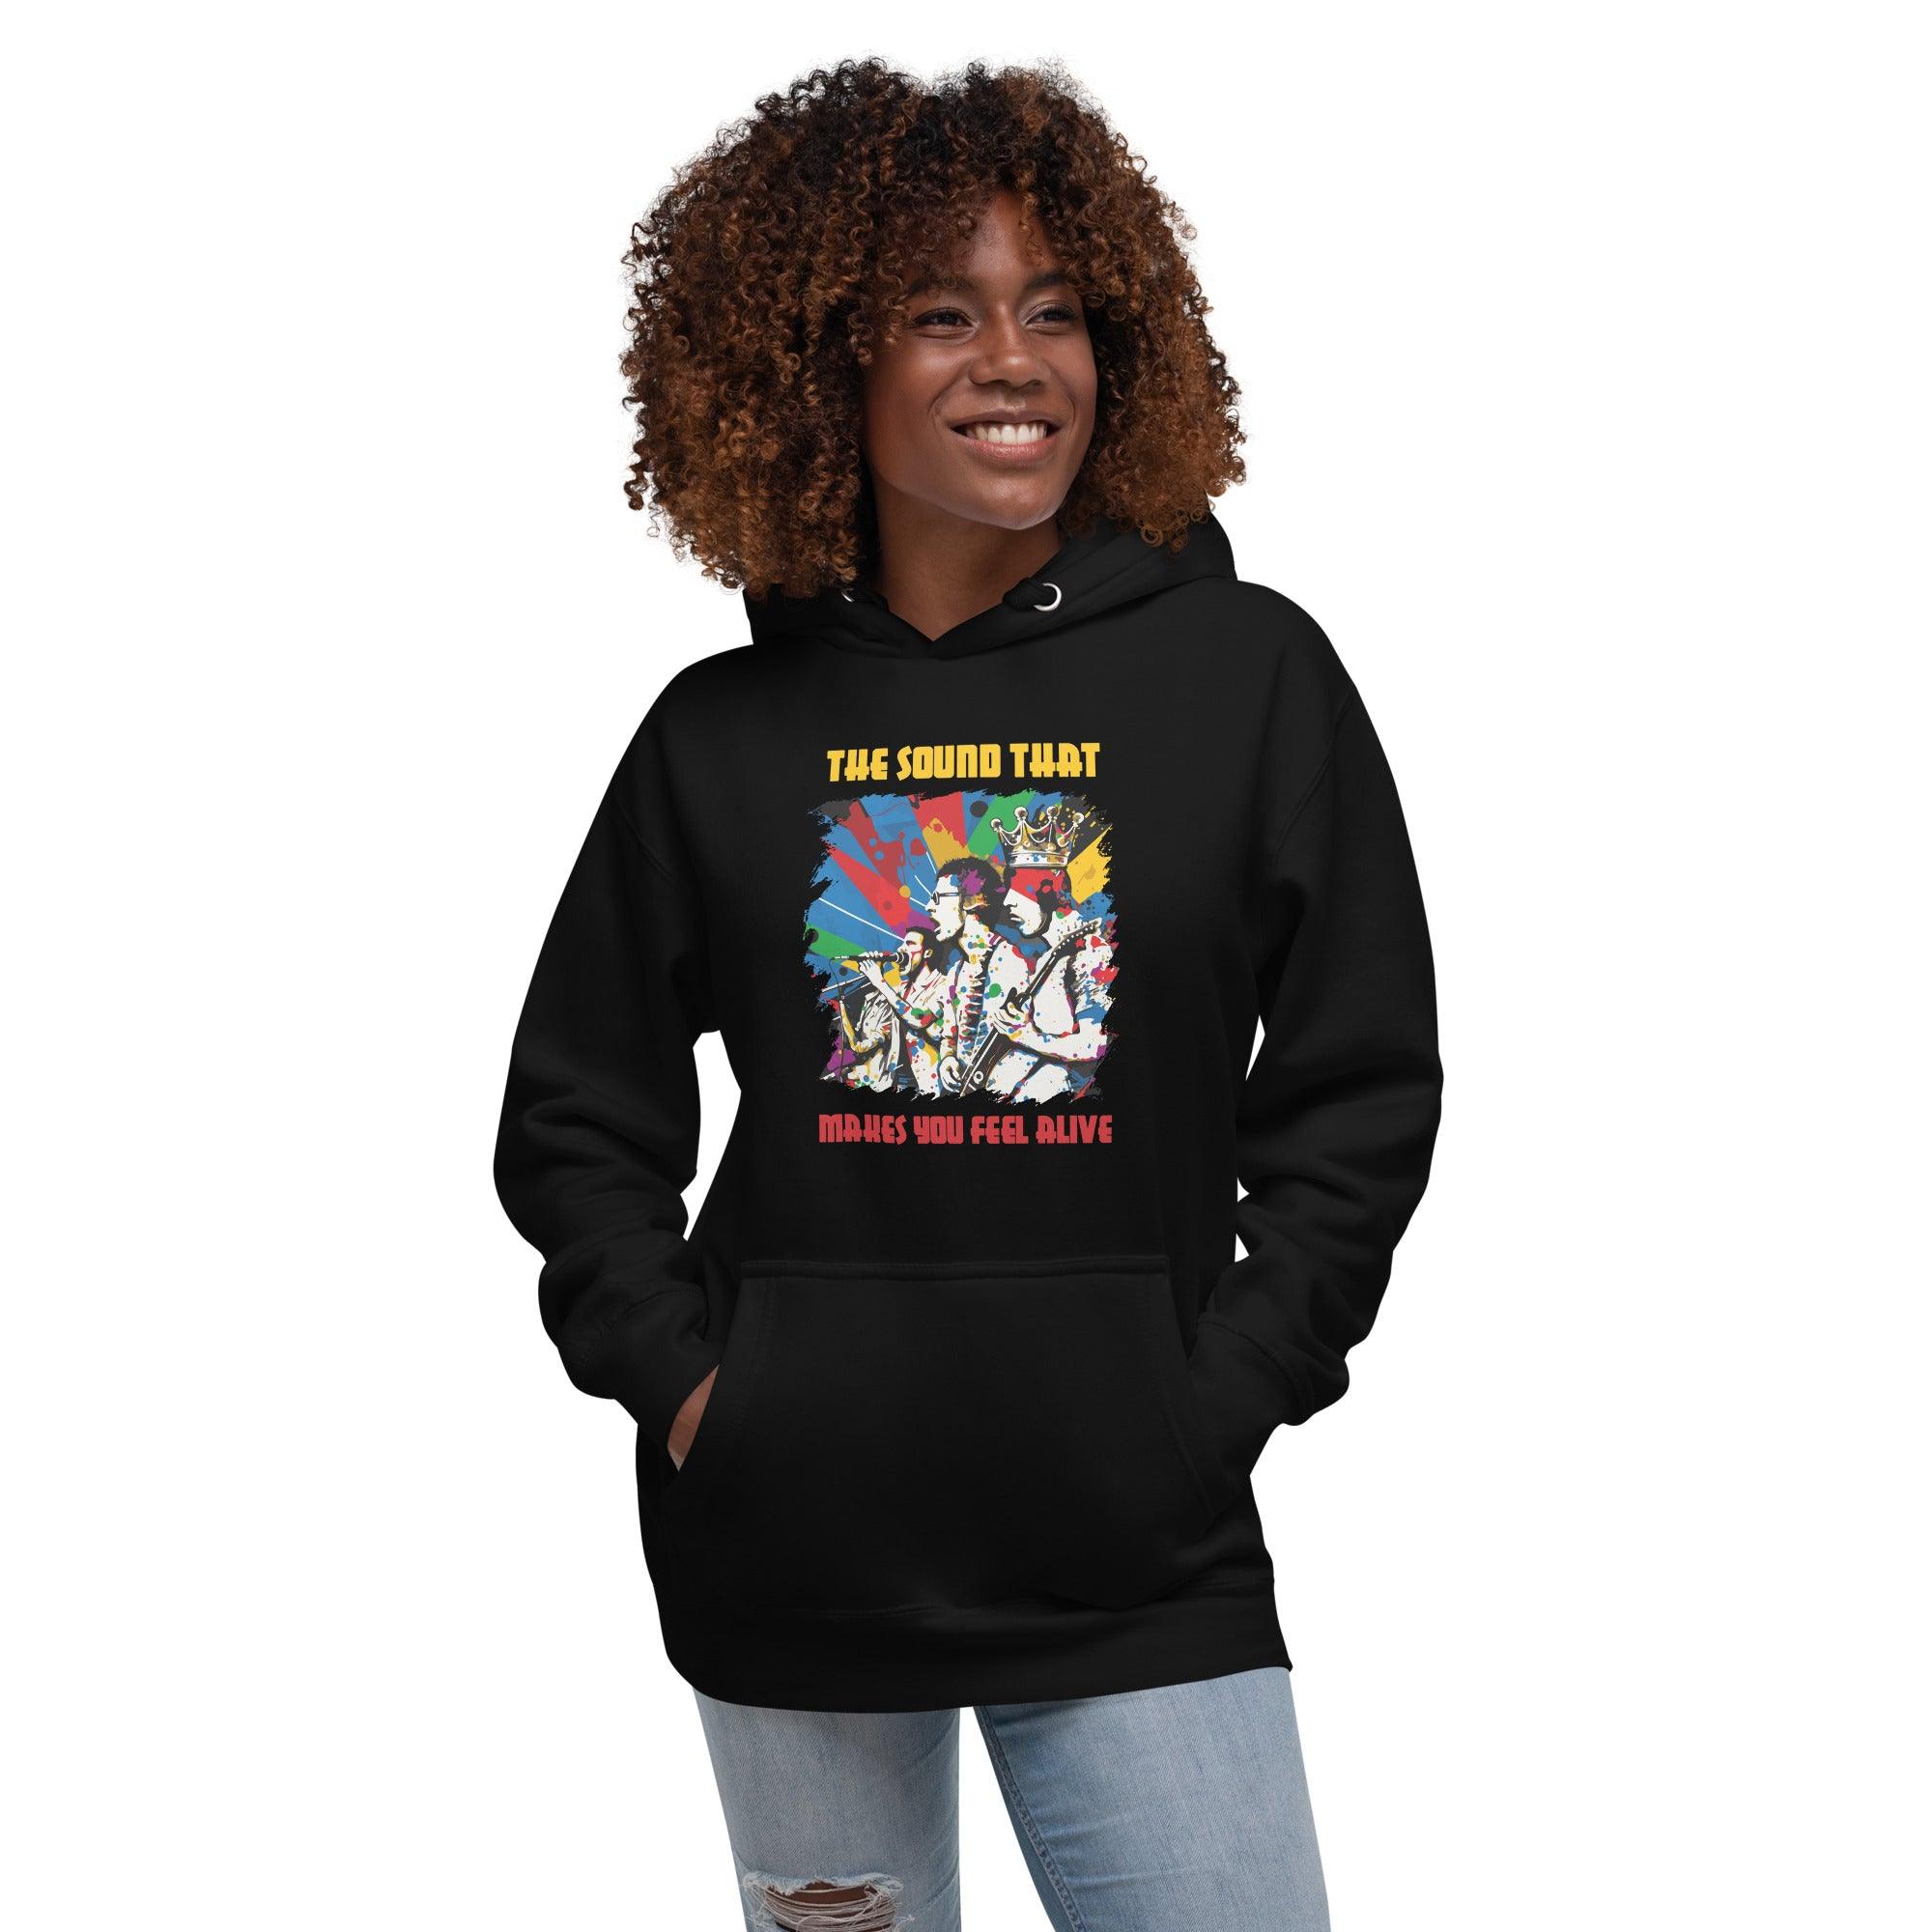 Makes You Feel Alive Unisex Hoodie - Beyond T-shirts